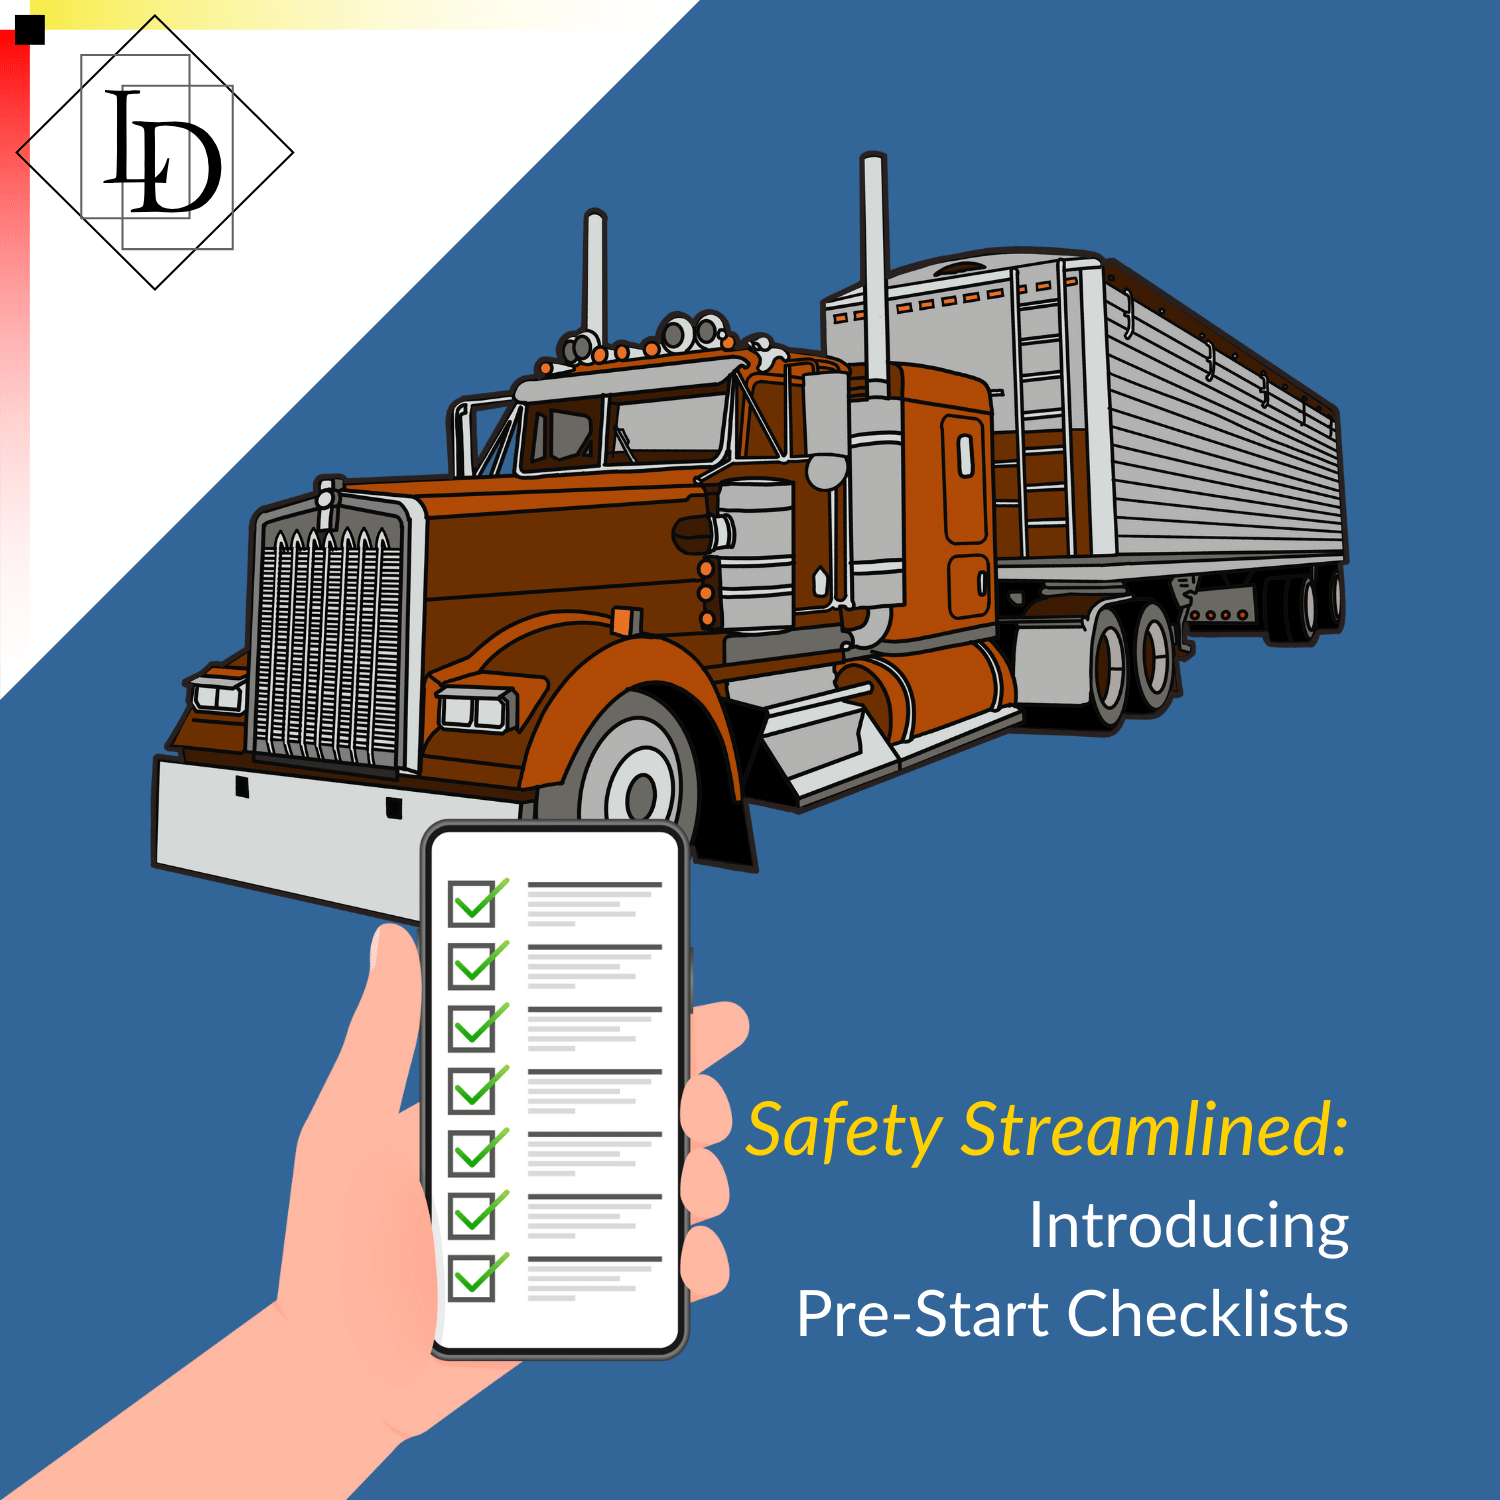 The image has the LD logo in the top left. The image displays a hand holding a smartphone with the screen displaying a checklist. In the background is a truck and trailer. The caption reads, "Safety Streamlined: Introducing Pre-Start Checklists"